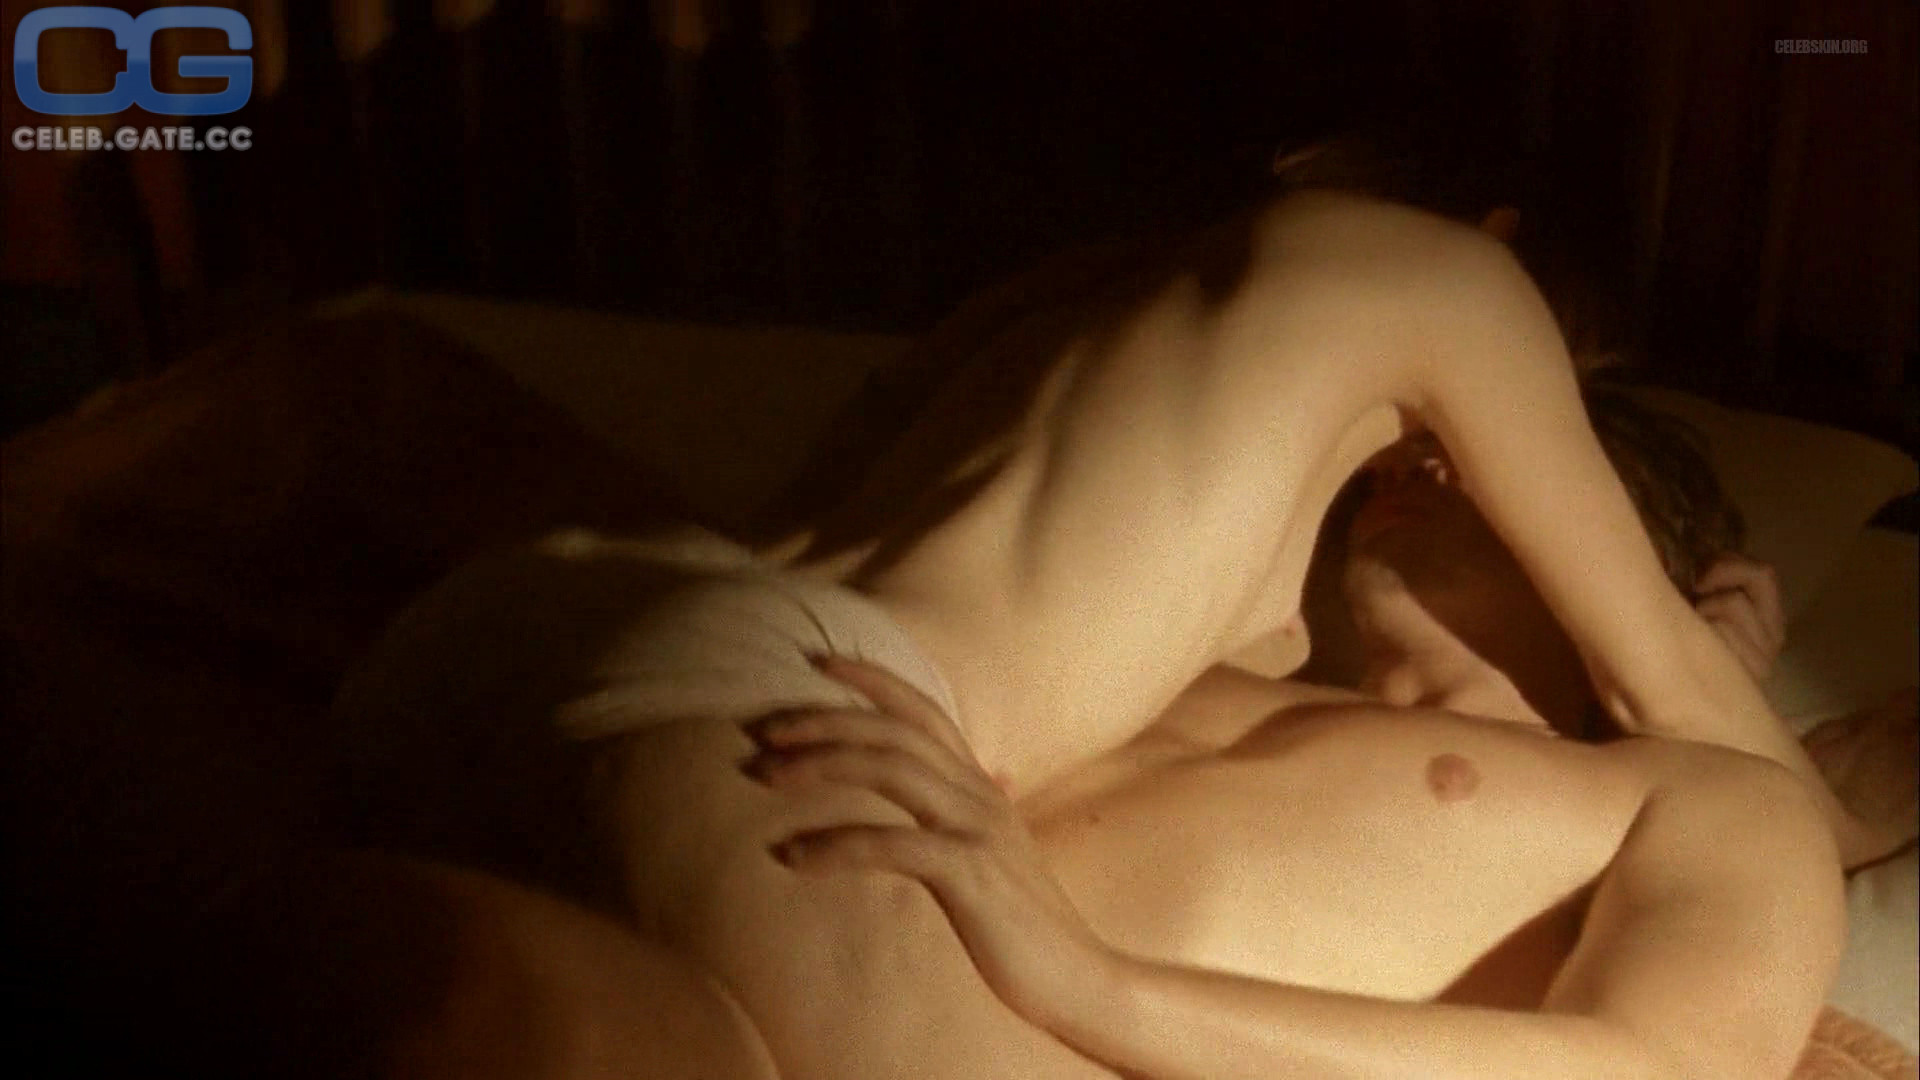 Emily browning naked